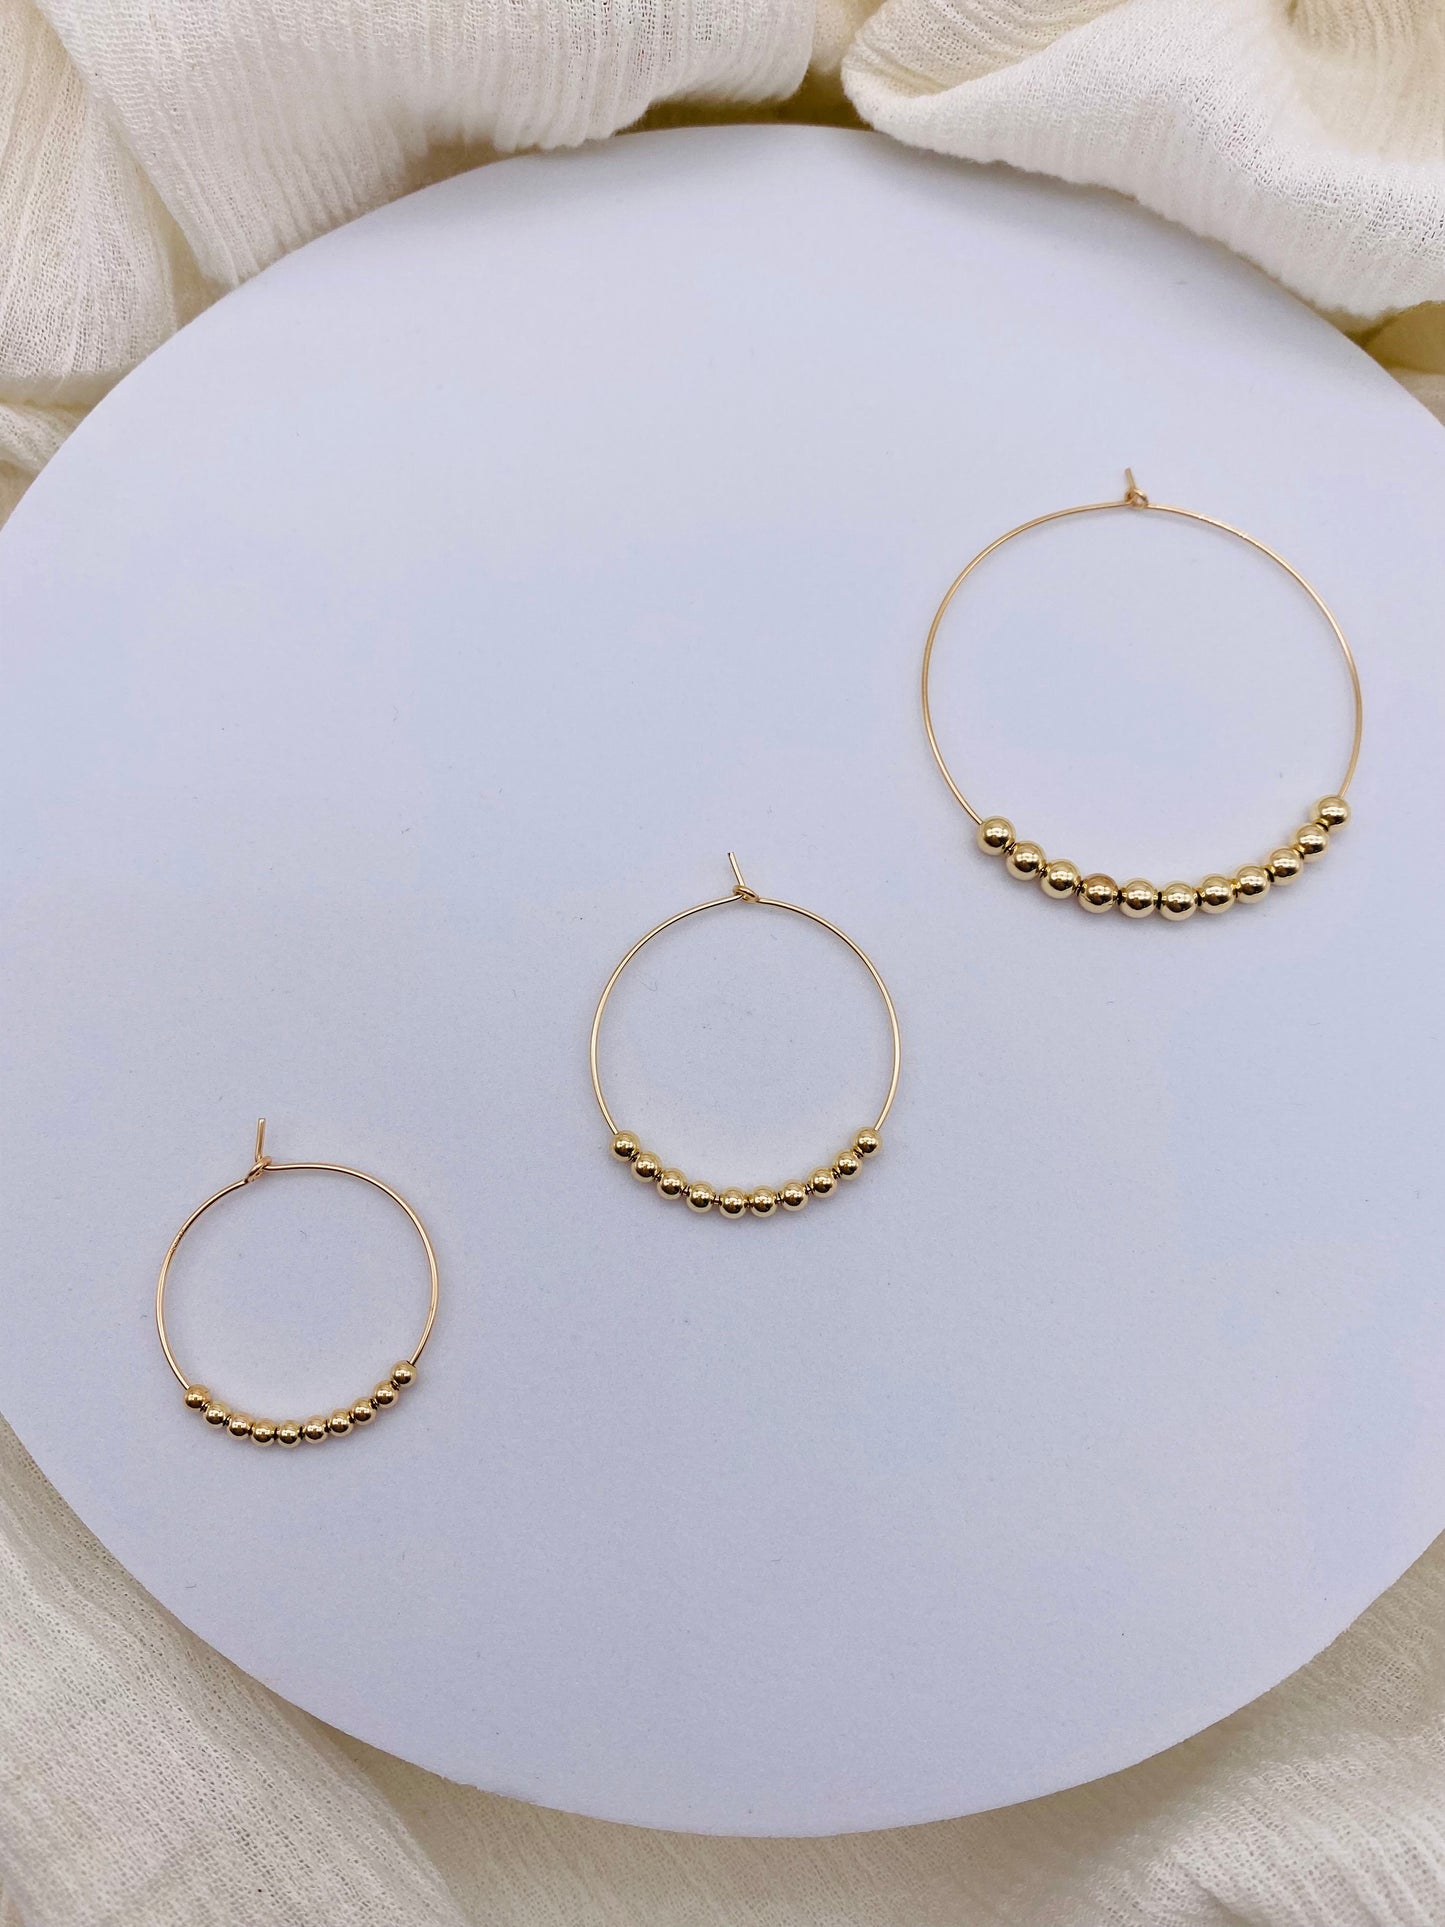 Gold Beaded Hoops - 3 Sizes